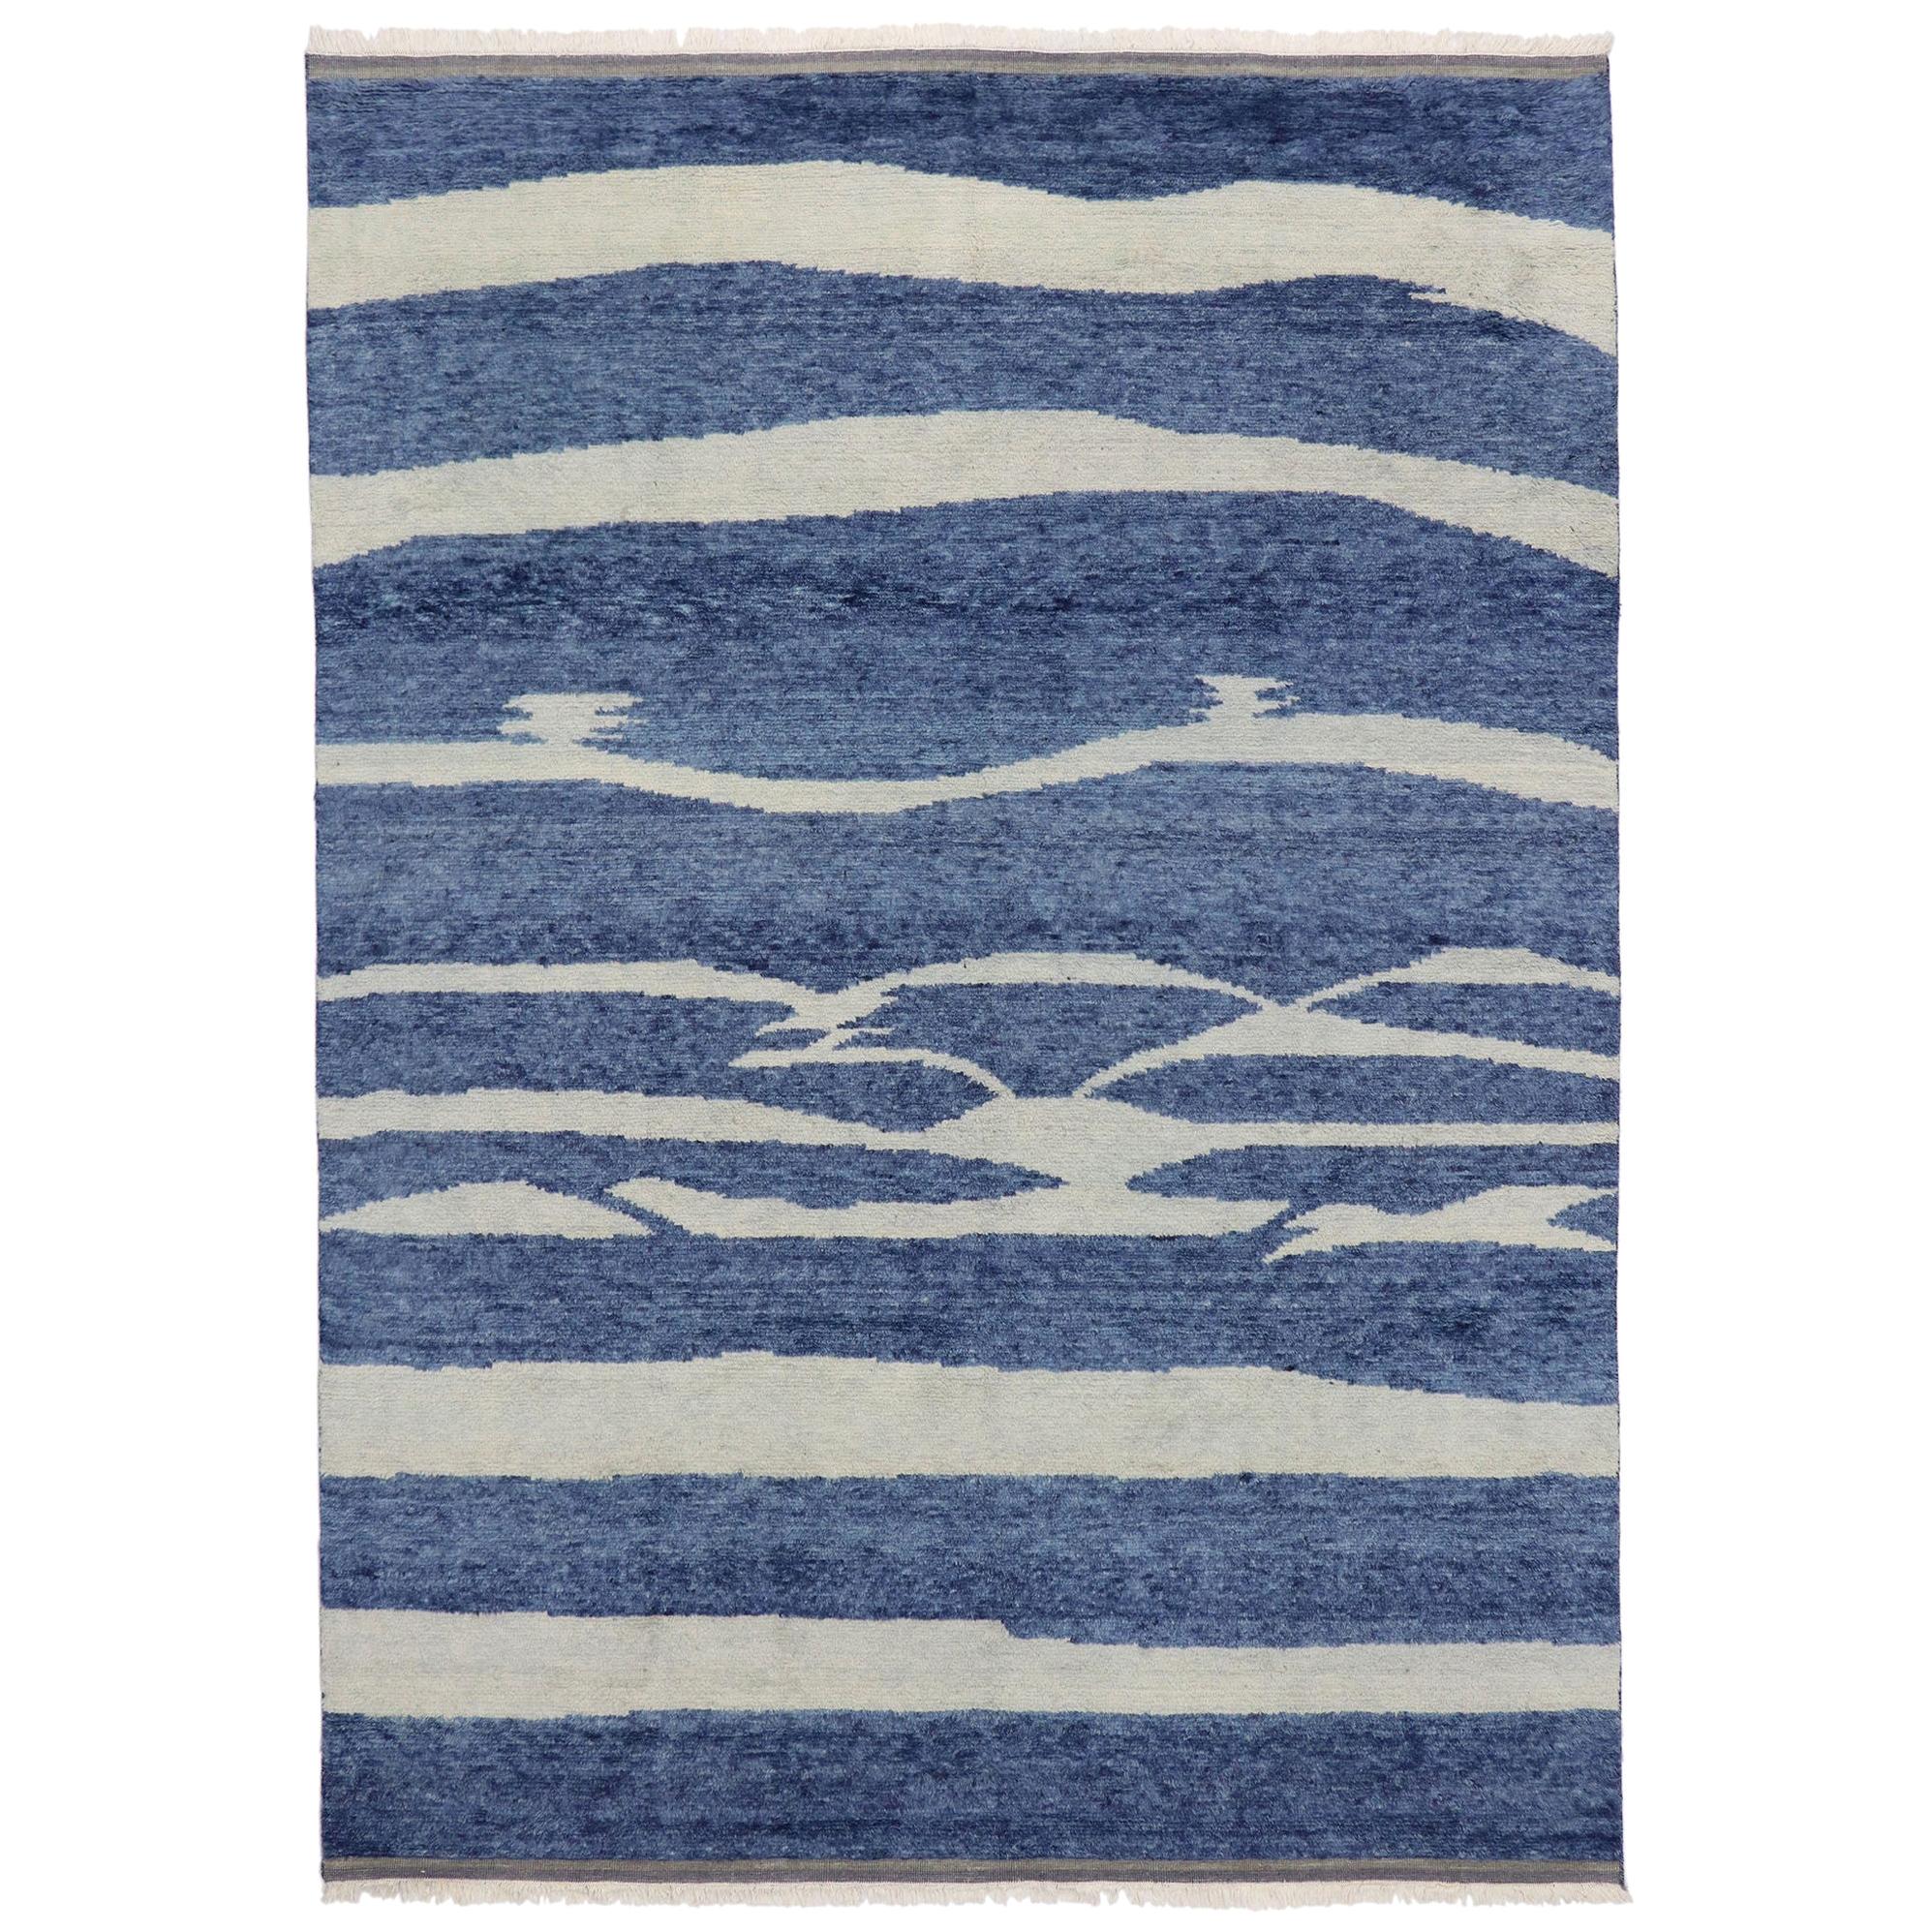 New Contemporary Moroccan Beach Style Rug with Coastal Design For Sale